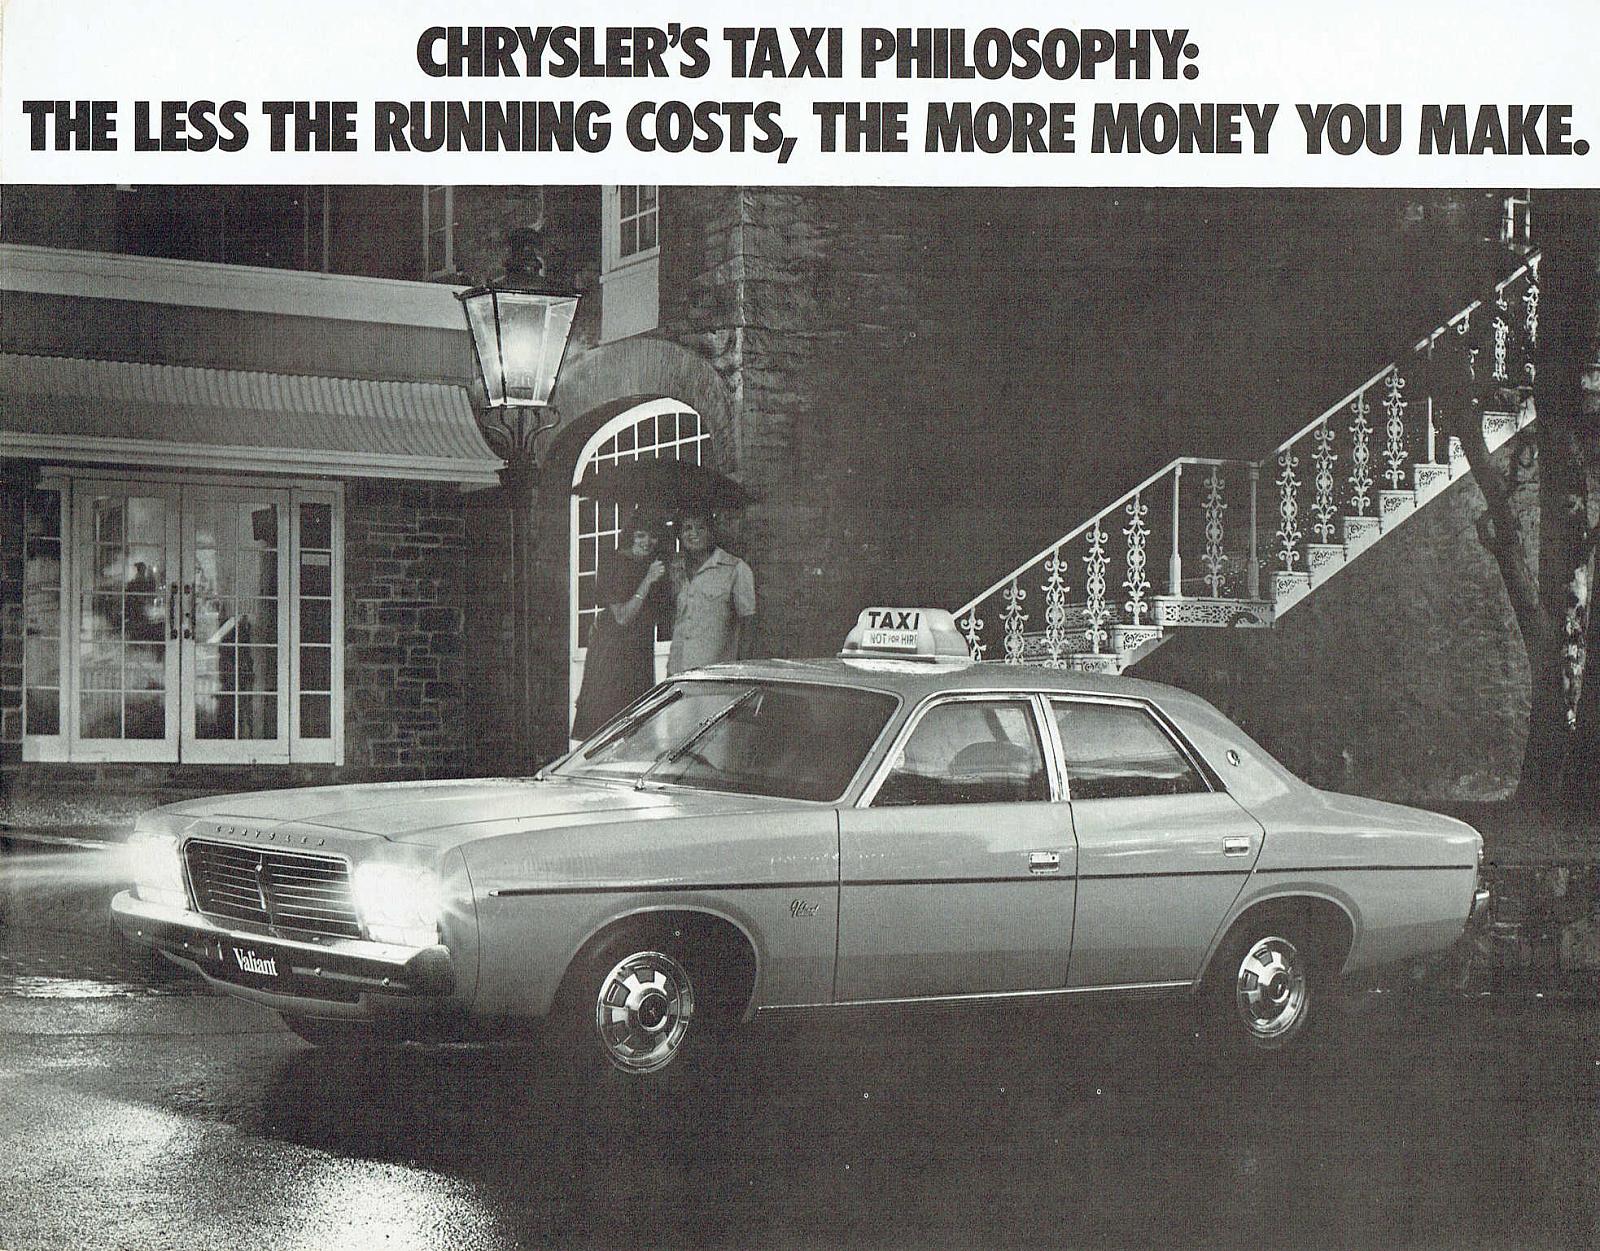 1976 Chrysler CL Valiant Taxi Brochure Page 1